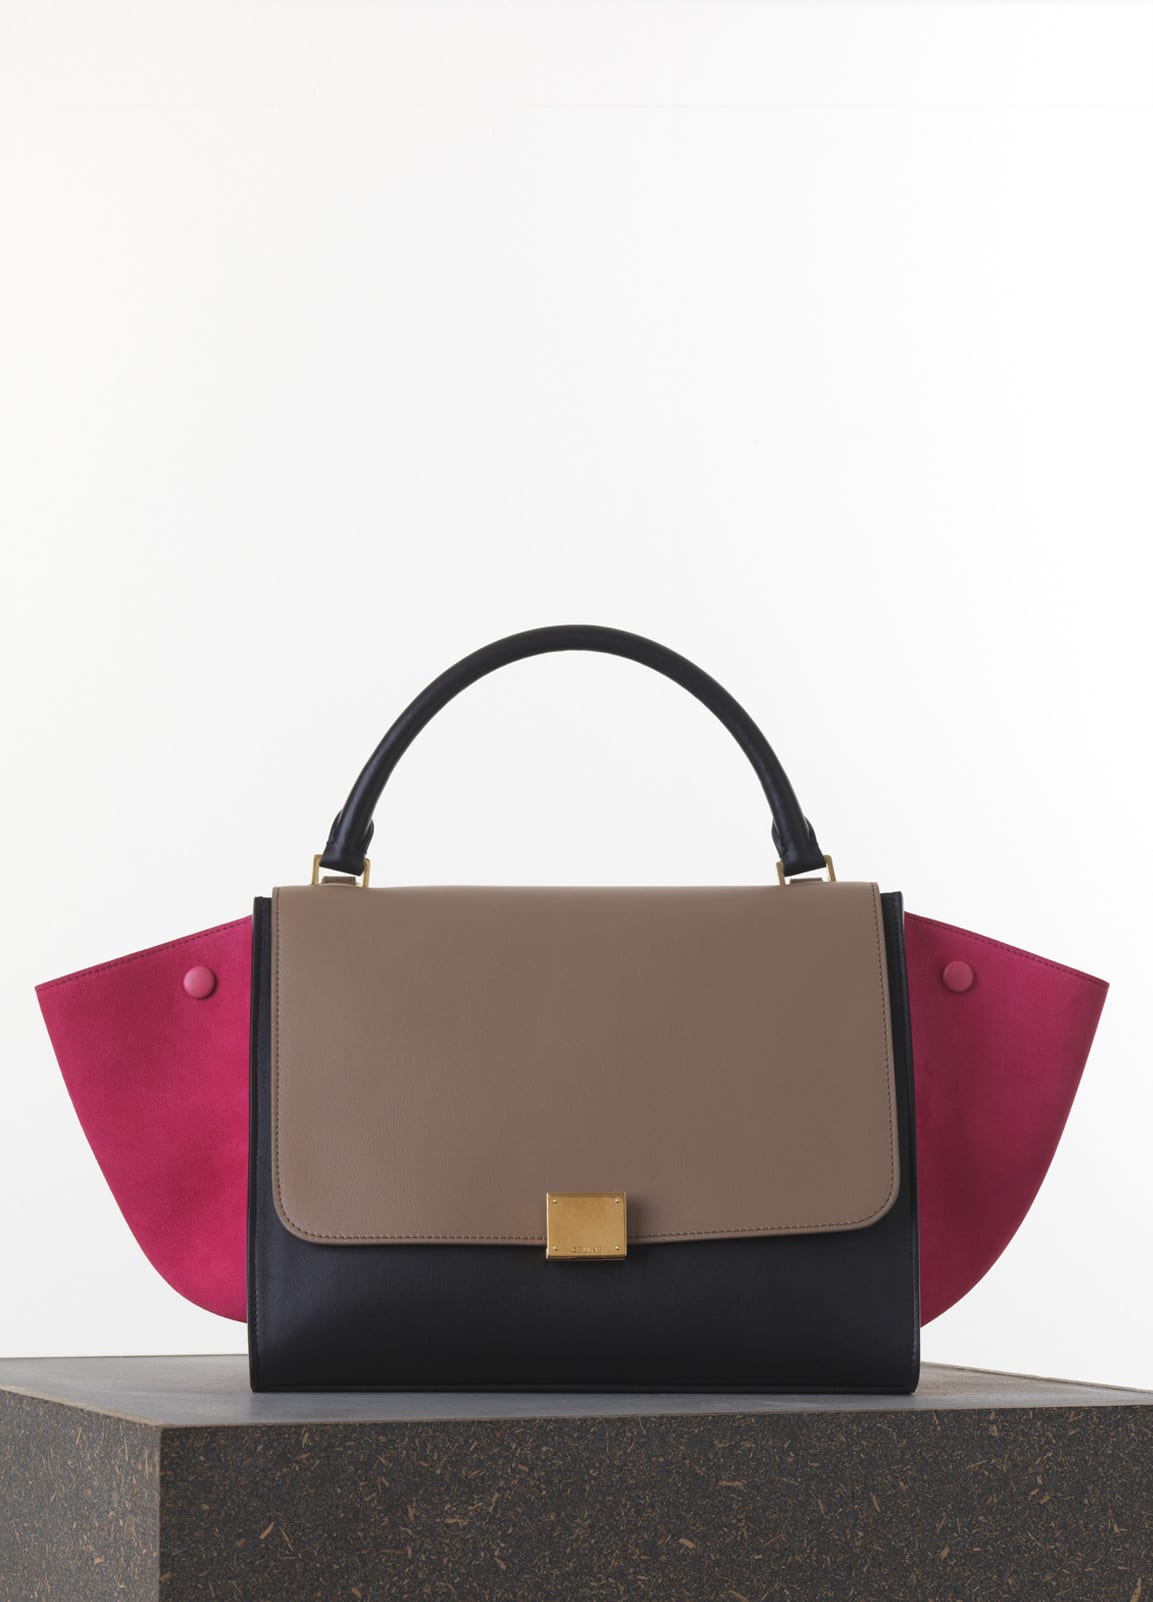 celine shopping bag price - Celine Trapeze Tote Bag Reference Guide | Spotted Fashion